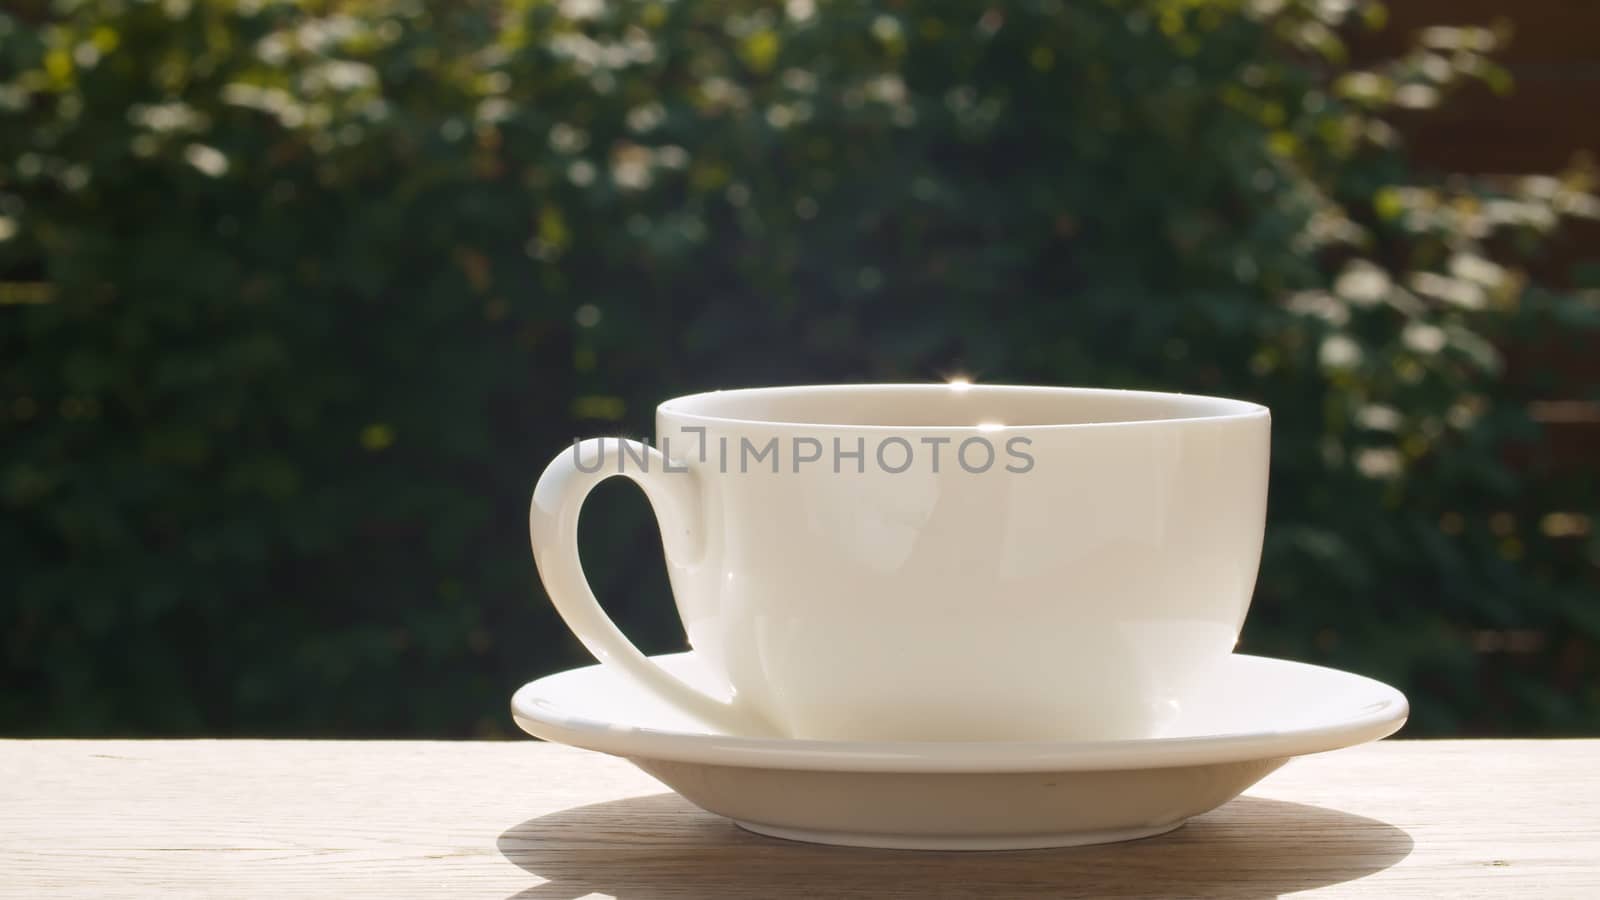 Teacup on the table in the garden by Alize